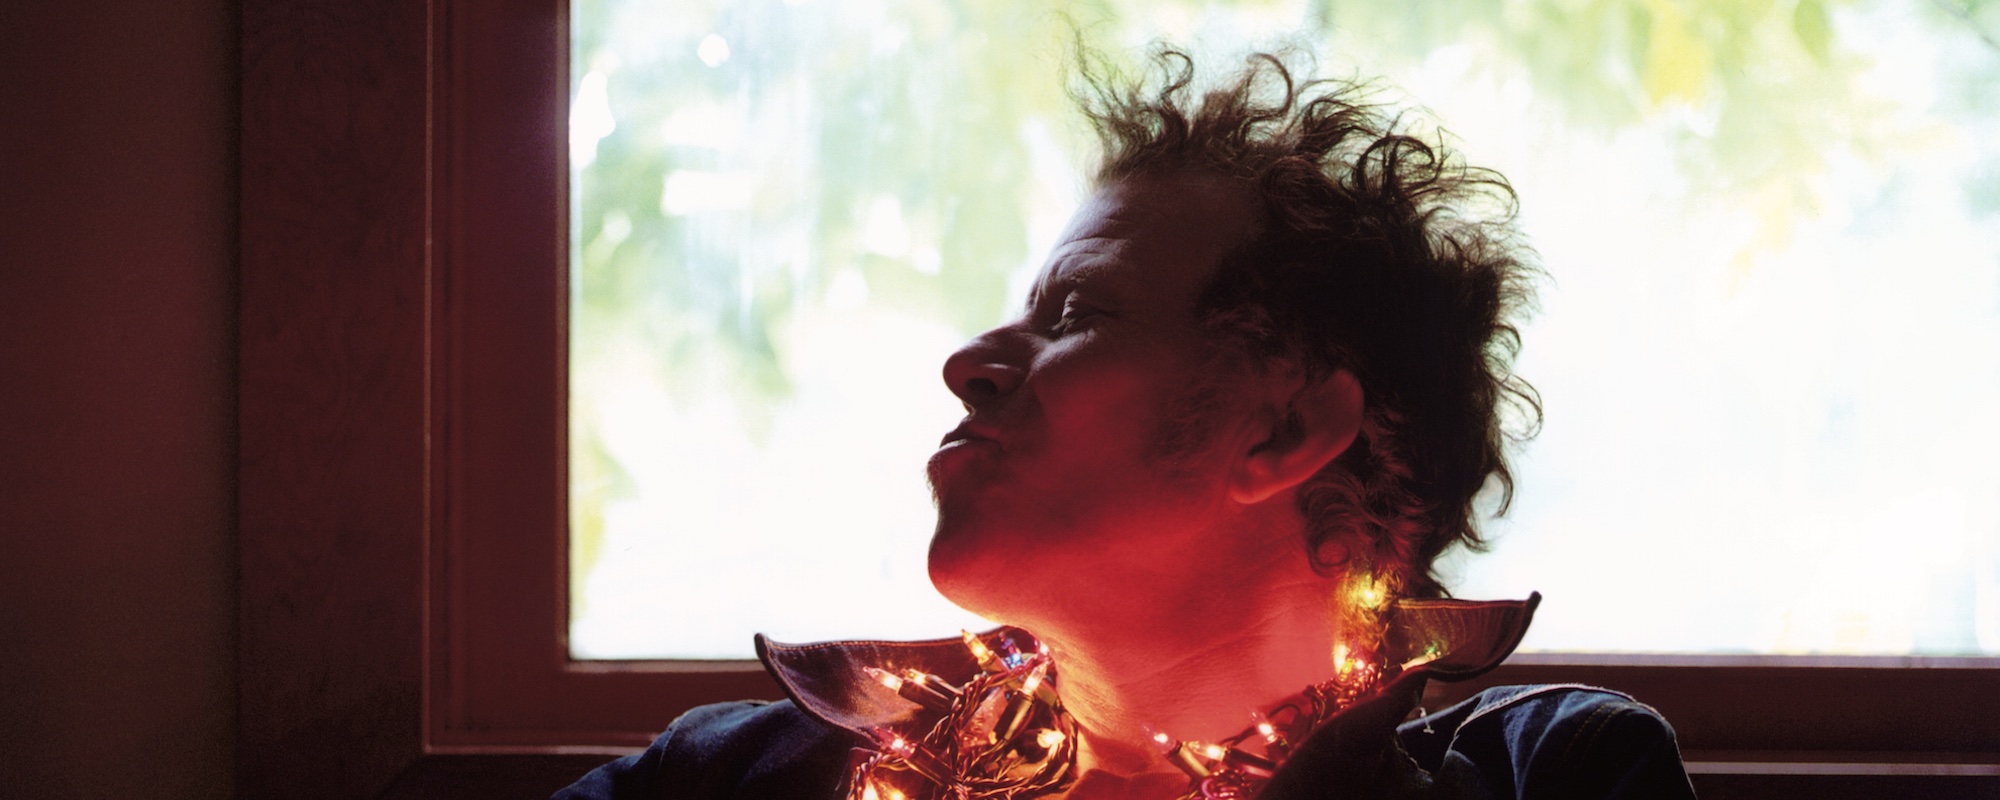 Tom Waits to Release 20th Anniversary Limited Edition Vinyl Reissues for His 2002 Albums ‘Alice’ and ‘Blood Money’